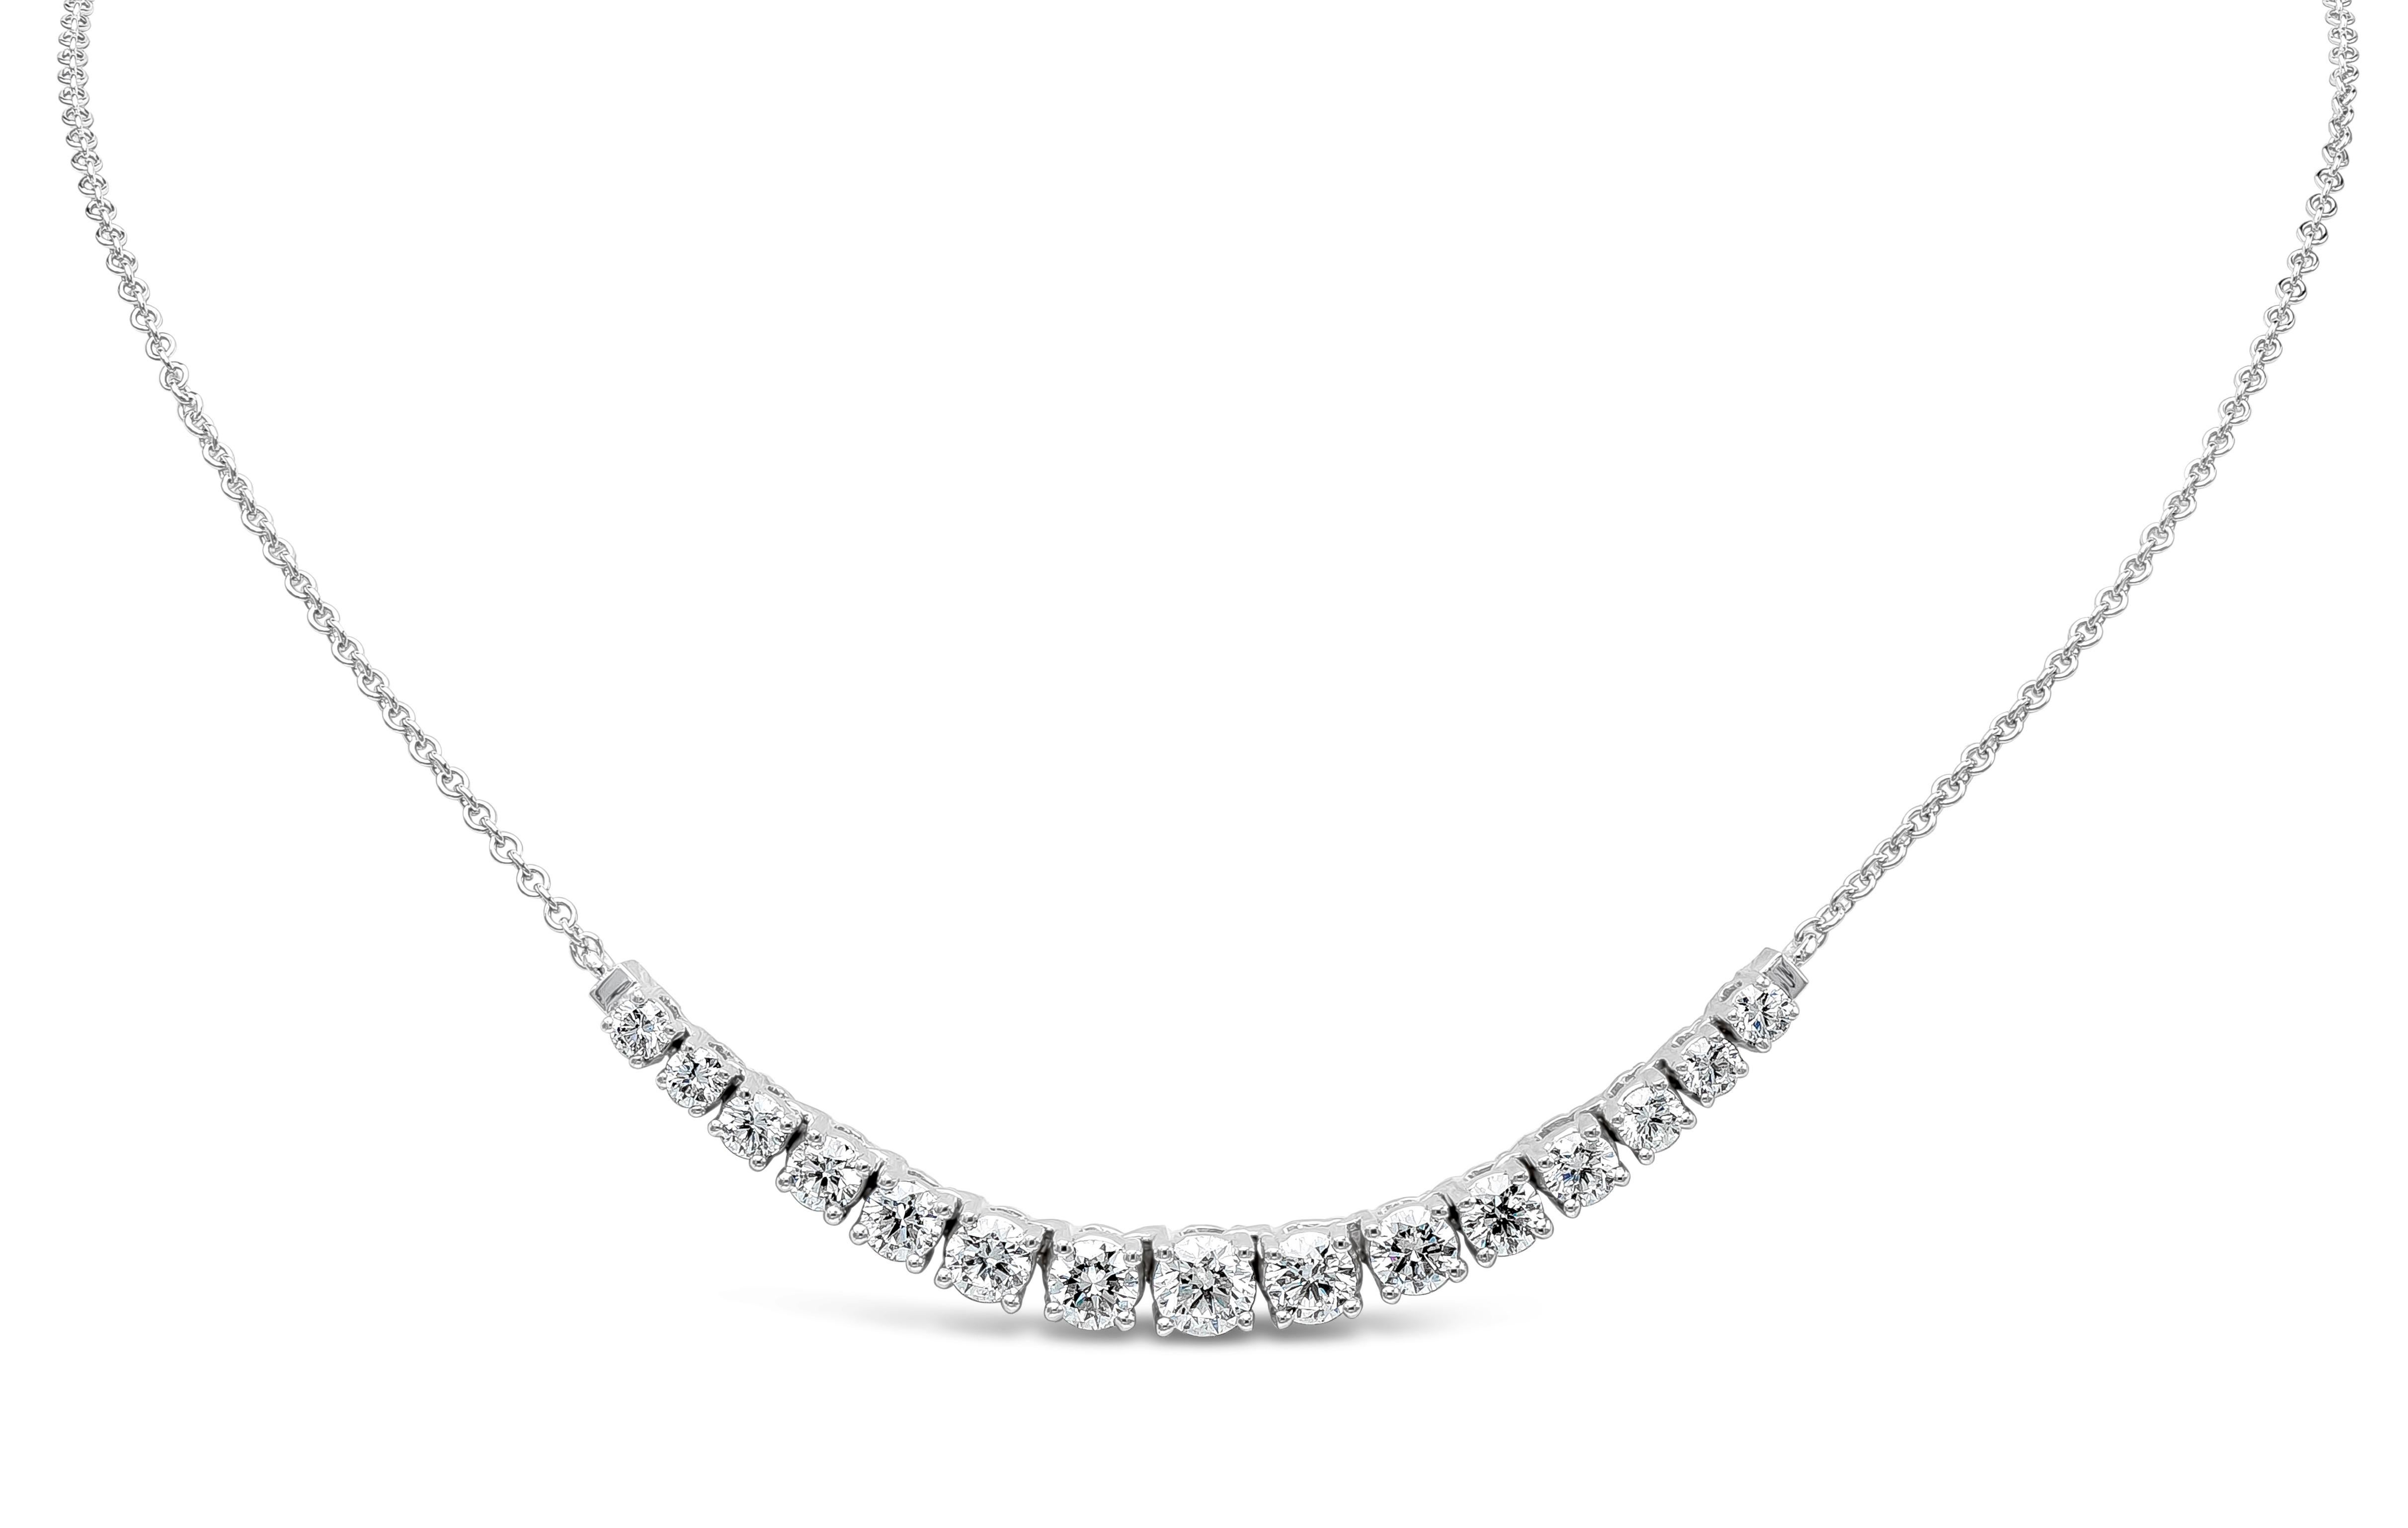 A fashionable mini riviere style necklace showcasing graduating round brilliant cut diamonds ,suspended on an 18 inch White Gold chain and set in a three prong basket setting. Diamonds weigh 2.70 carats total and are approximately F-G color, SI-I1